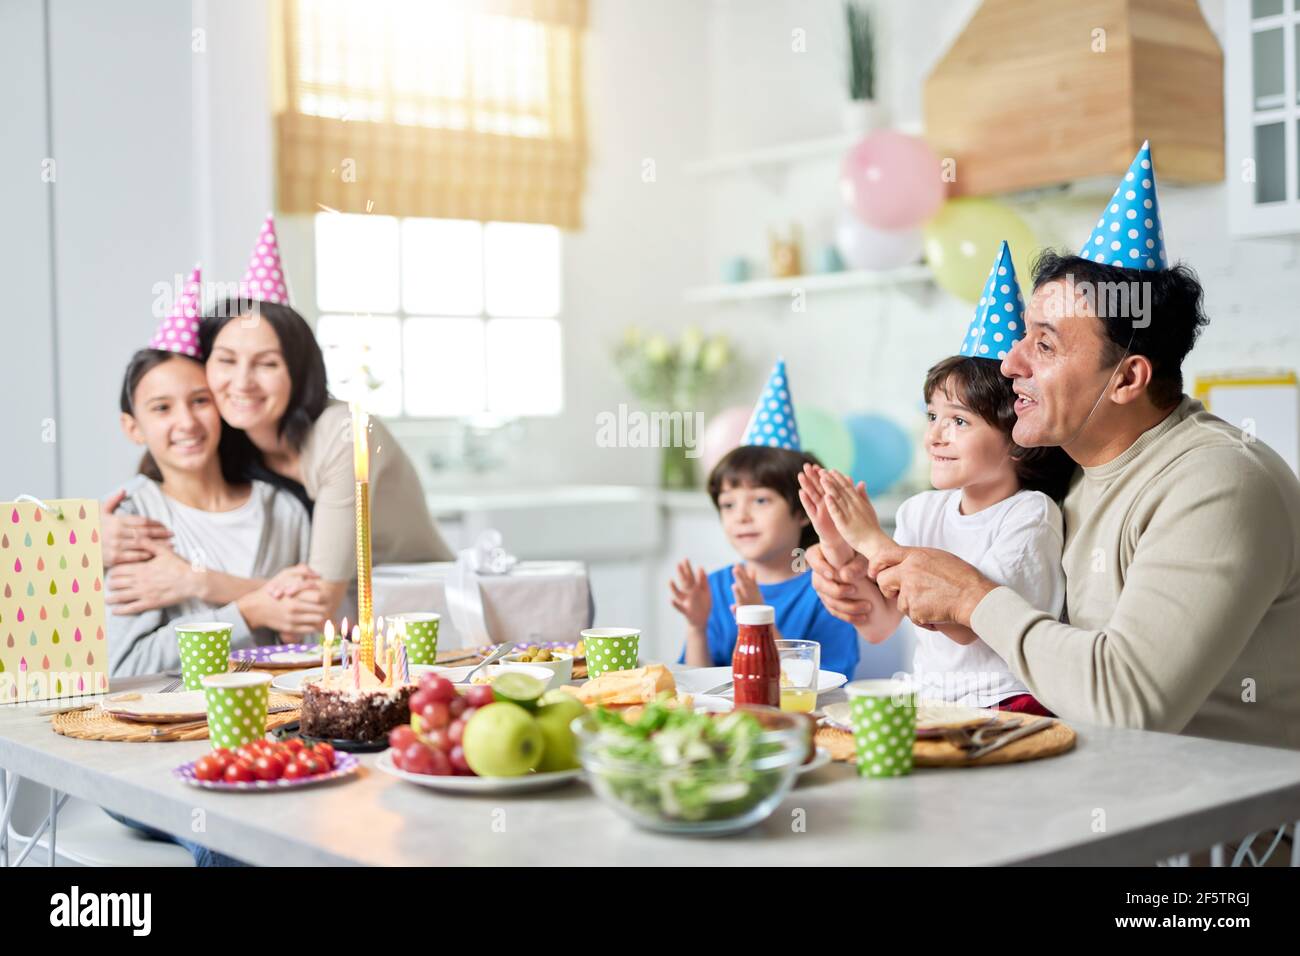 Joyful day. Happy latin american family with children looking suprised about firework sparkler on a cake while celebrating birthday together at home Stock Photo